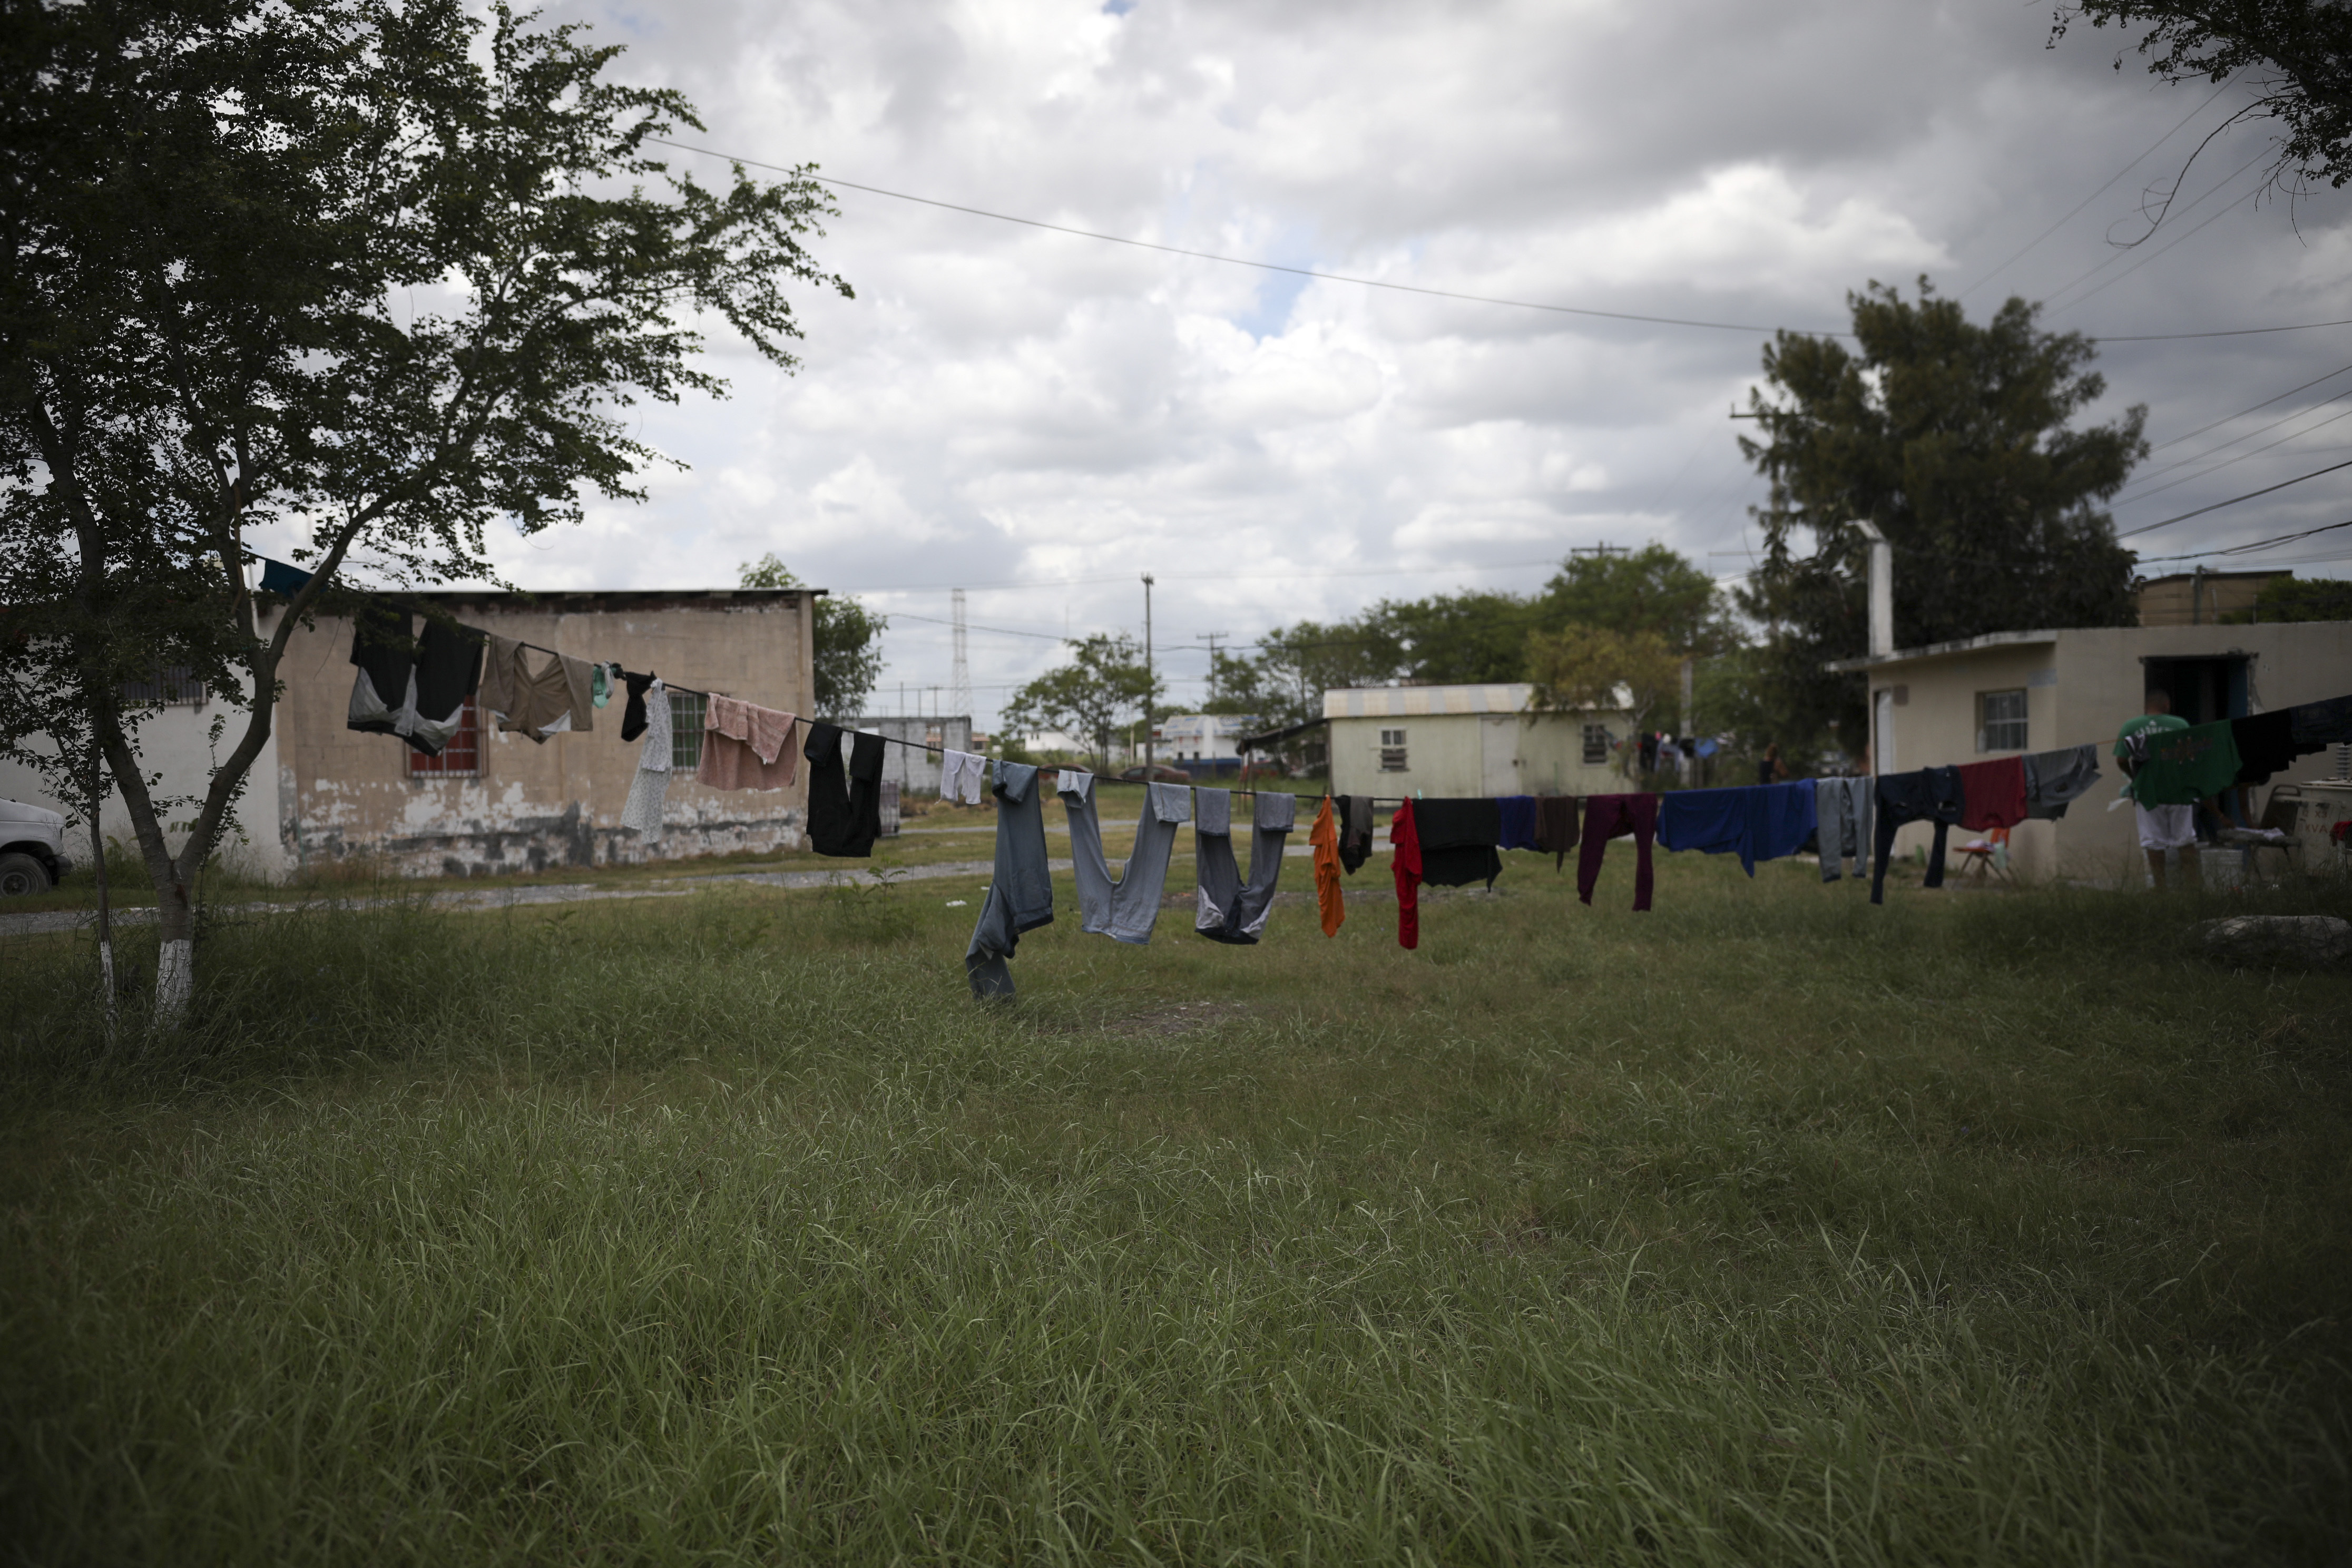 Recently washed clothes from migrants hang to dry outside the Viento Recio church, which is serving as a migrant shelter, in Matamoros, Mexico, Thursday, Aug. 1, 2019, on the border with Brownsville, Texas. So far more than 20,000 migrants have been returned to wait in Mexico for their U.S. asylum applications to be processed, according to Mexican authorities. (AP Photo/Emilio Espejel)